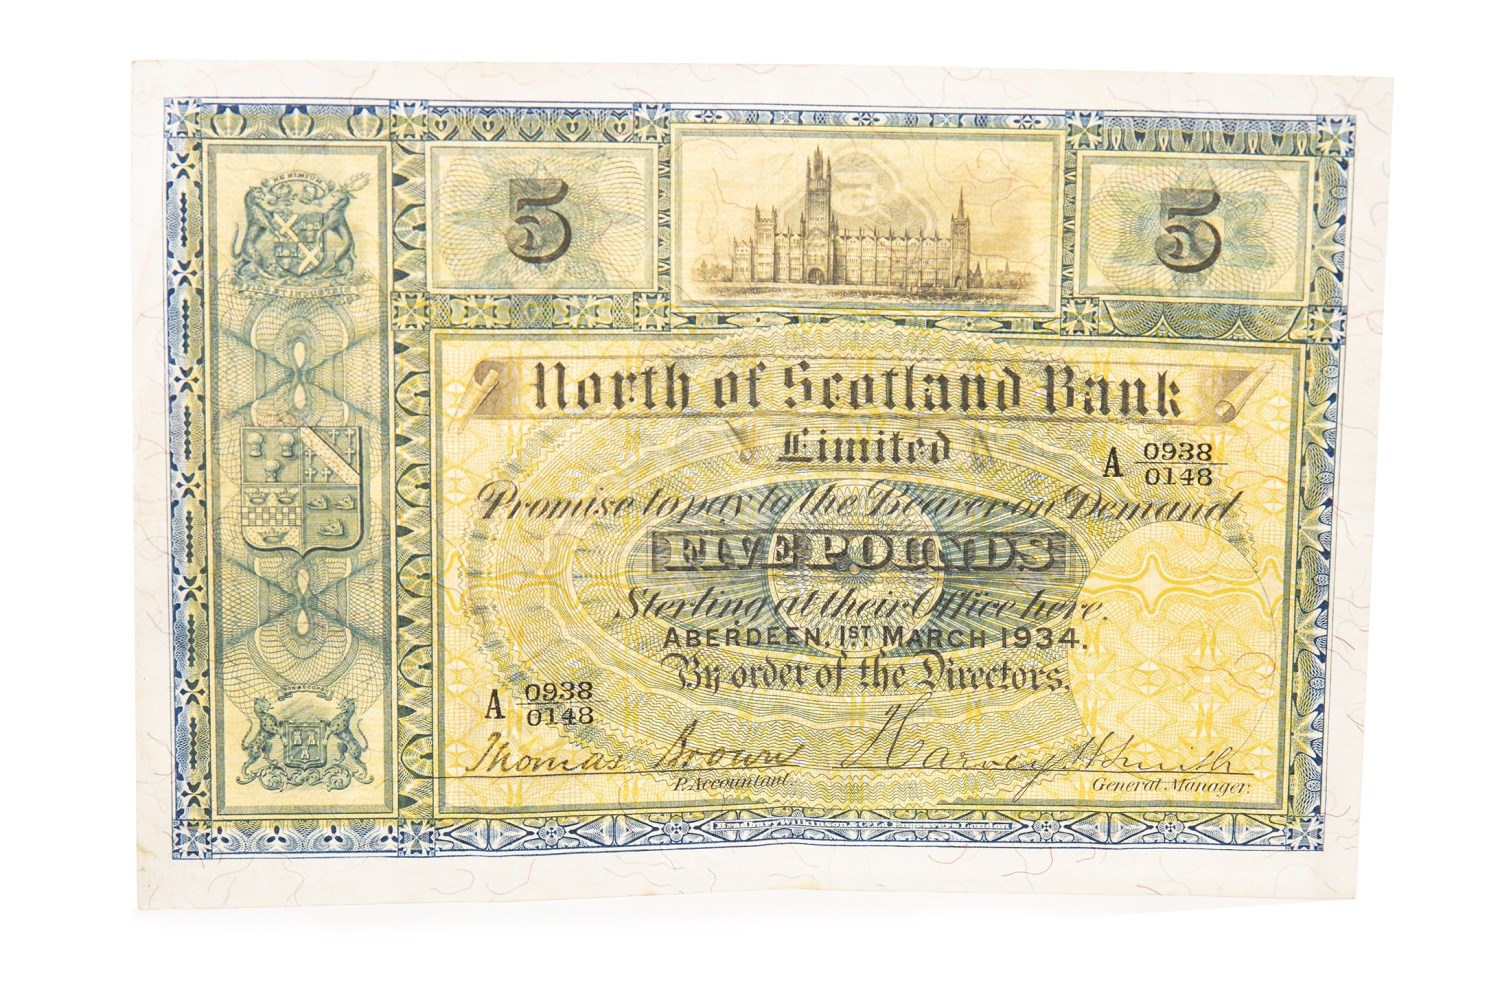 A NORTH OF SCOTLAND BANK LIMITED £5 NOTE, 1934